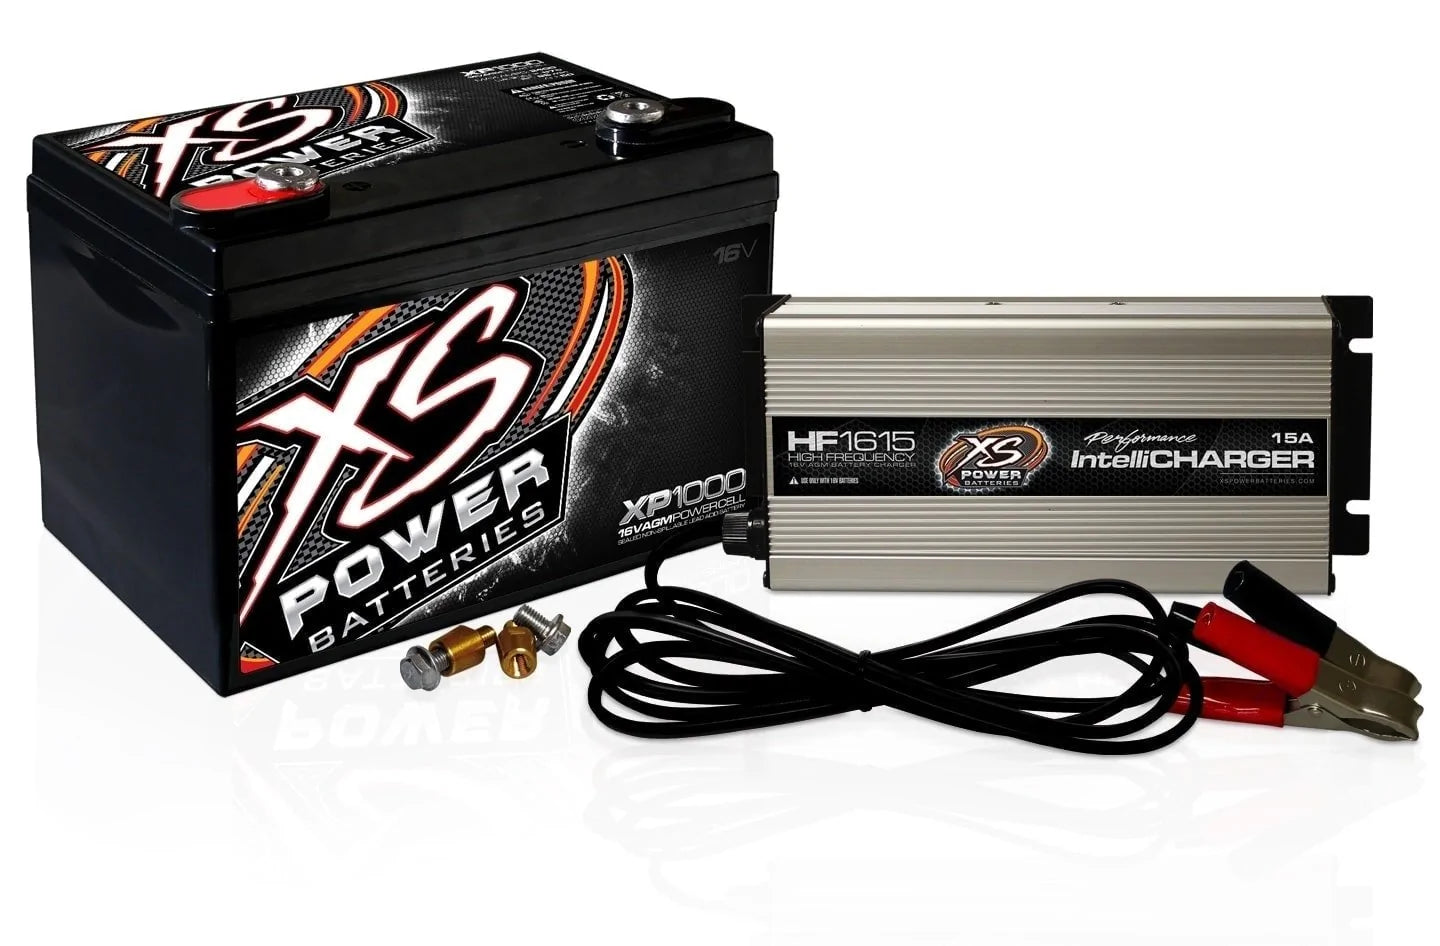 XP1000CK1 XS Power 16VDC AGM Car Audio Battery and HF1615 IntelliCharger Combo Kit